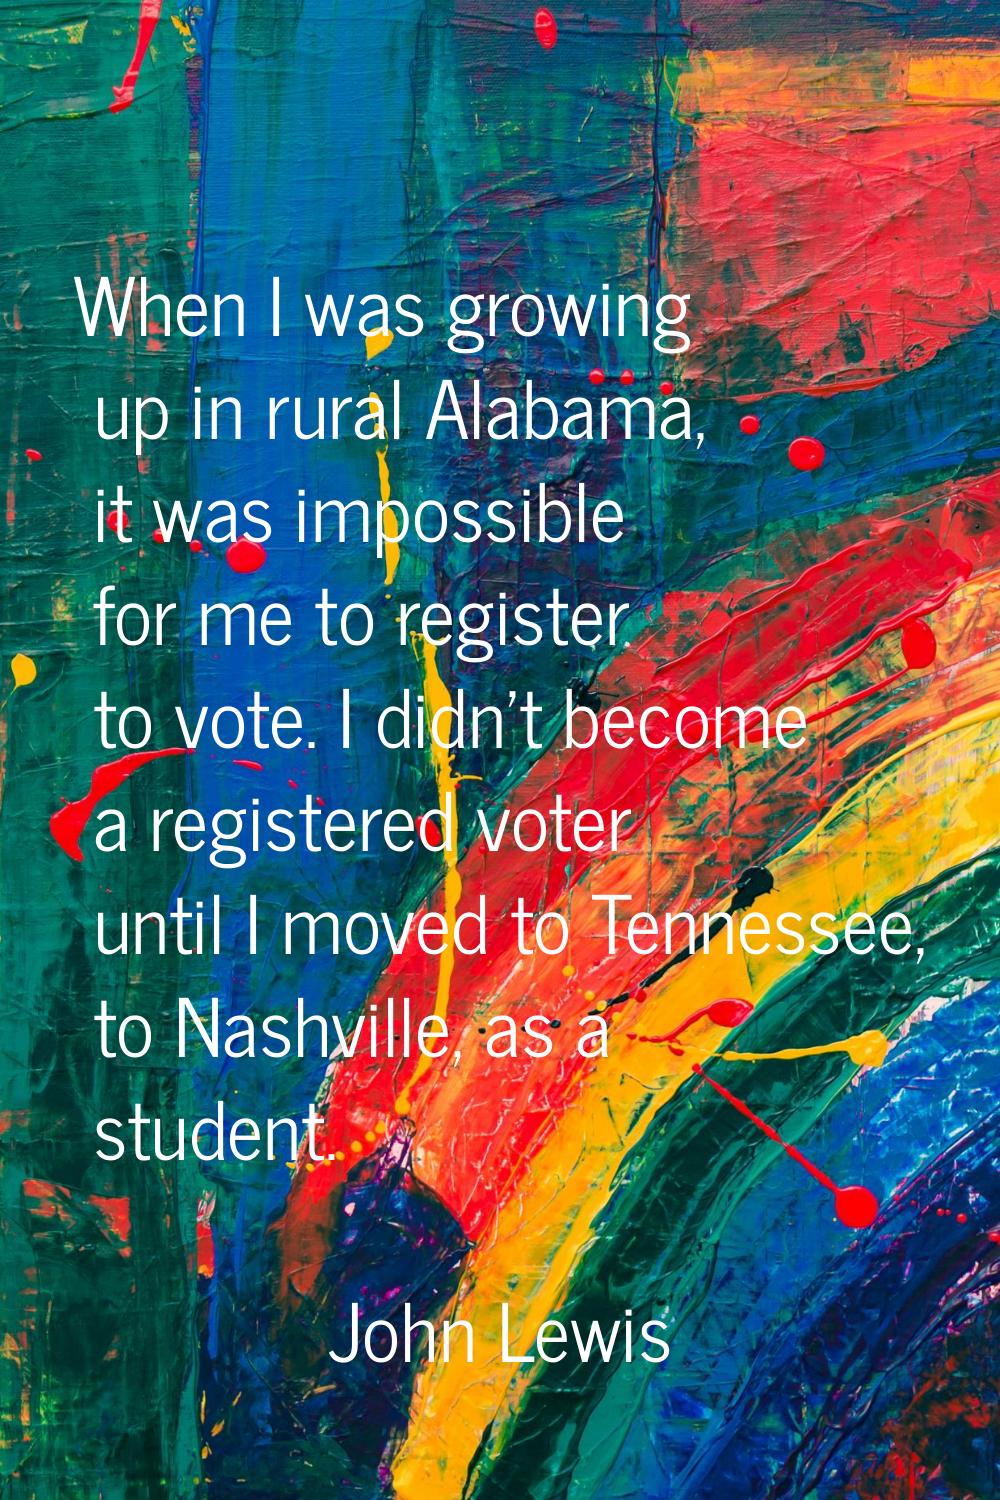 When I was growing up in rural Alabama, it was impossible for me to register to vote. I didn't beco